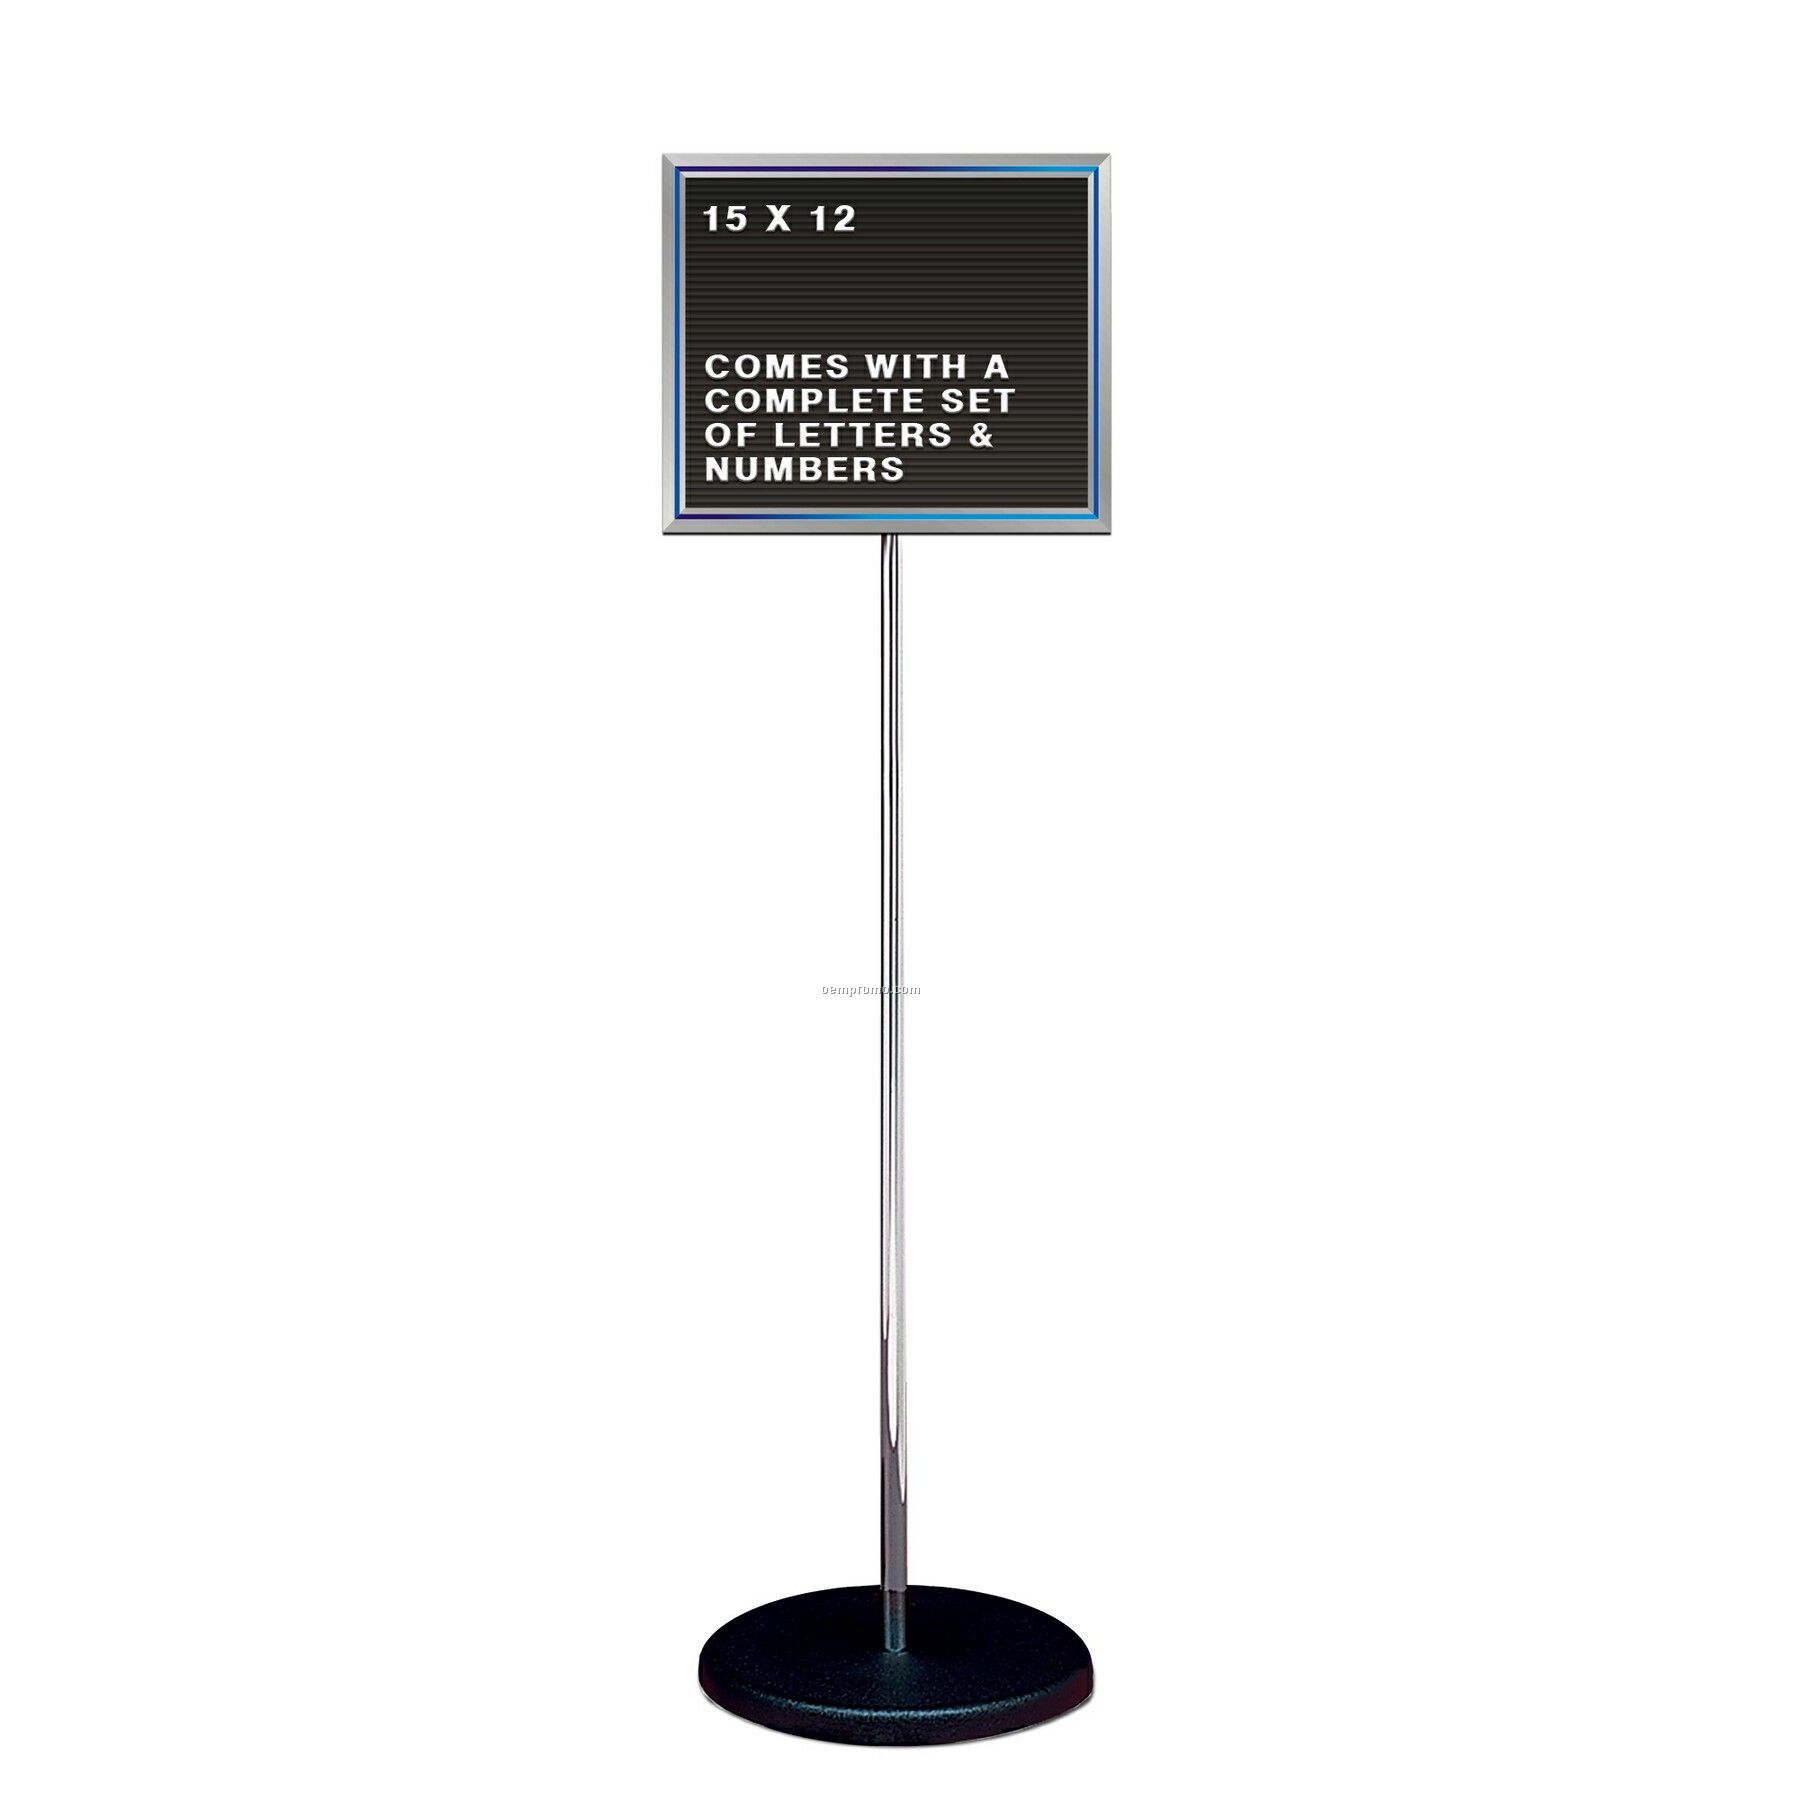 Free Standing Changeable Letter Board W/ Chrome Pole Stand (15"X12")